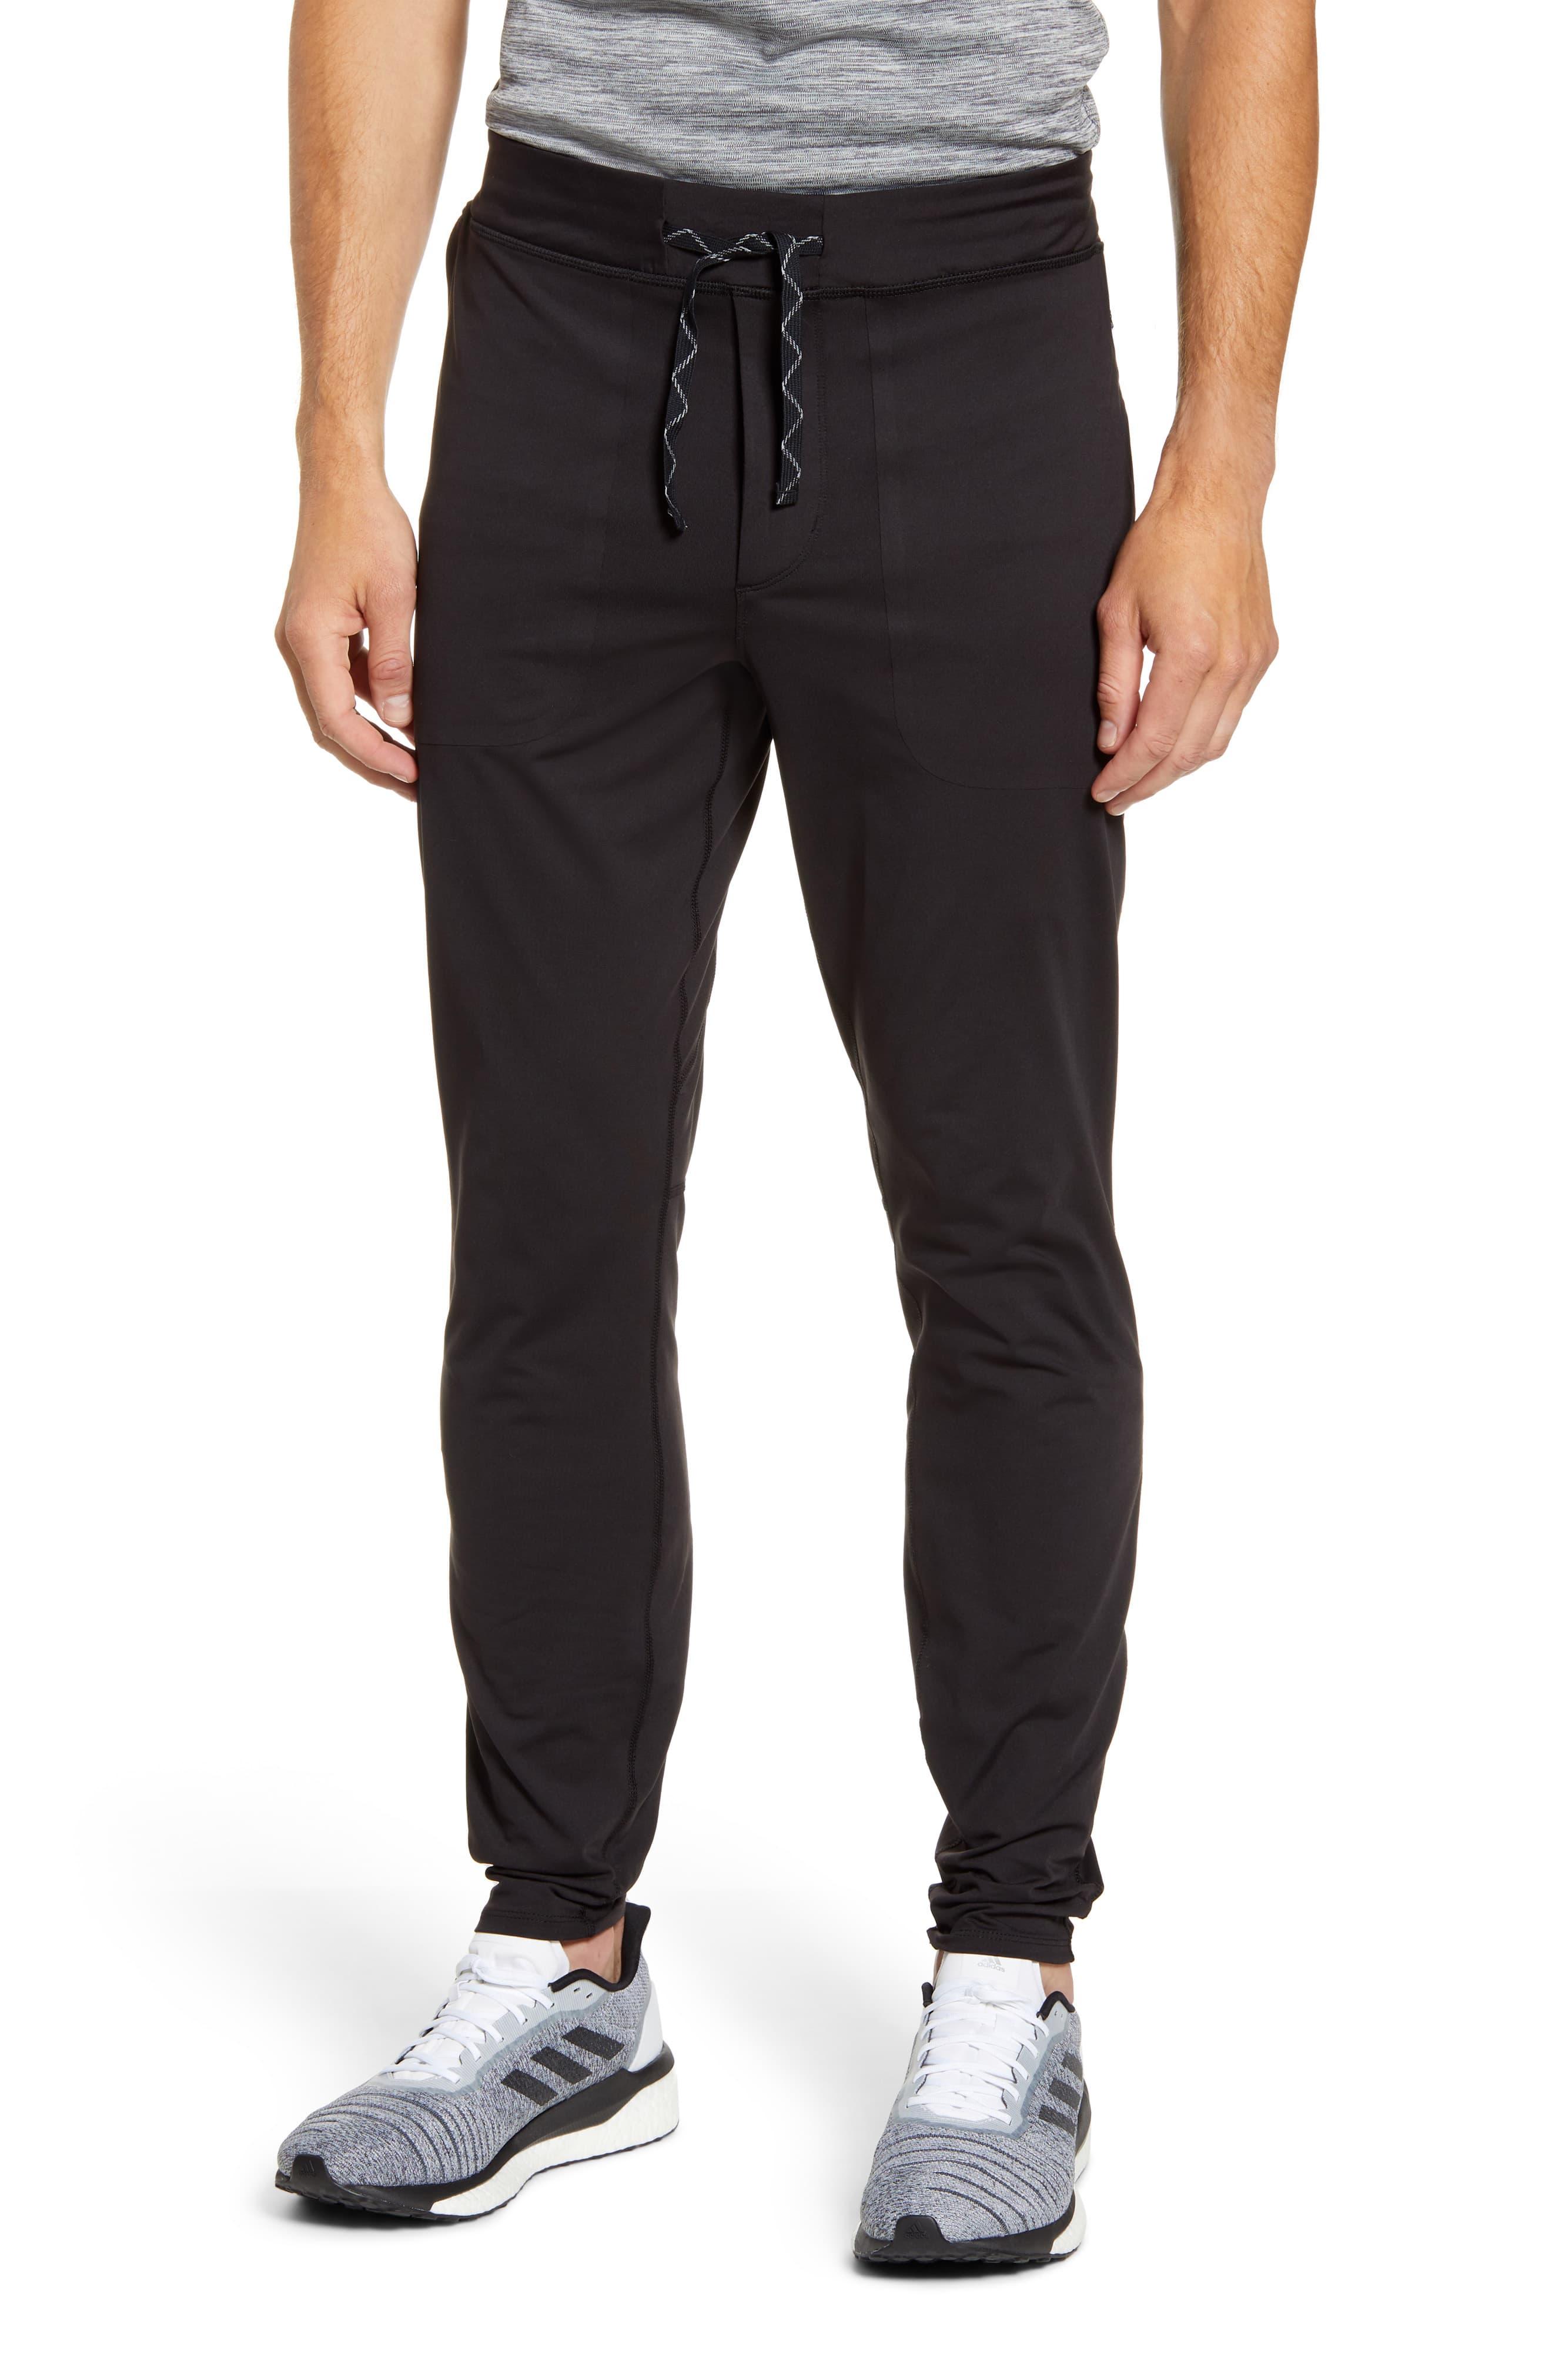 Patagonia Trail Pacer Jogger Pants in Black for Men - Lyst